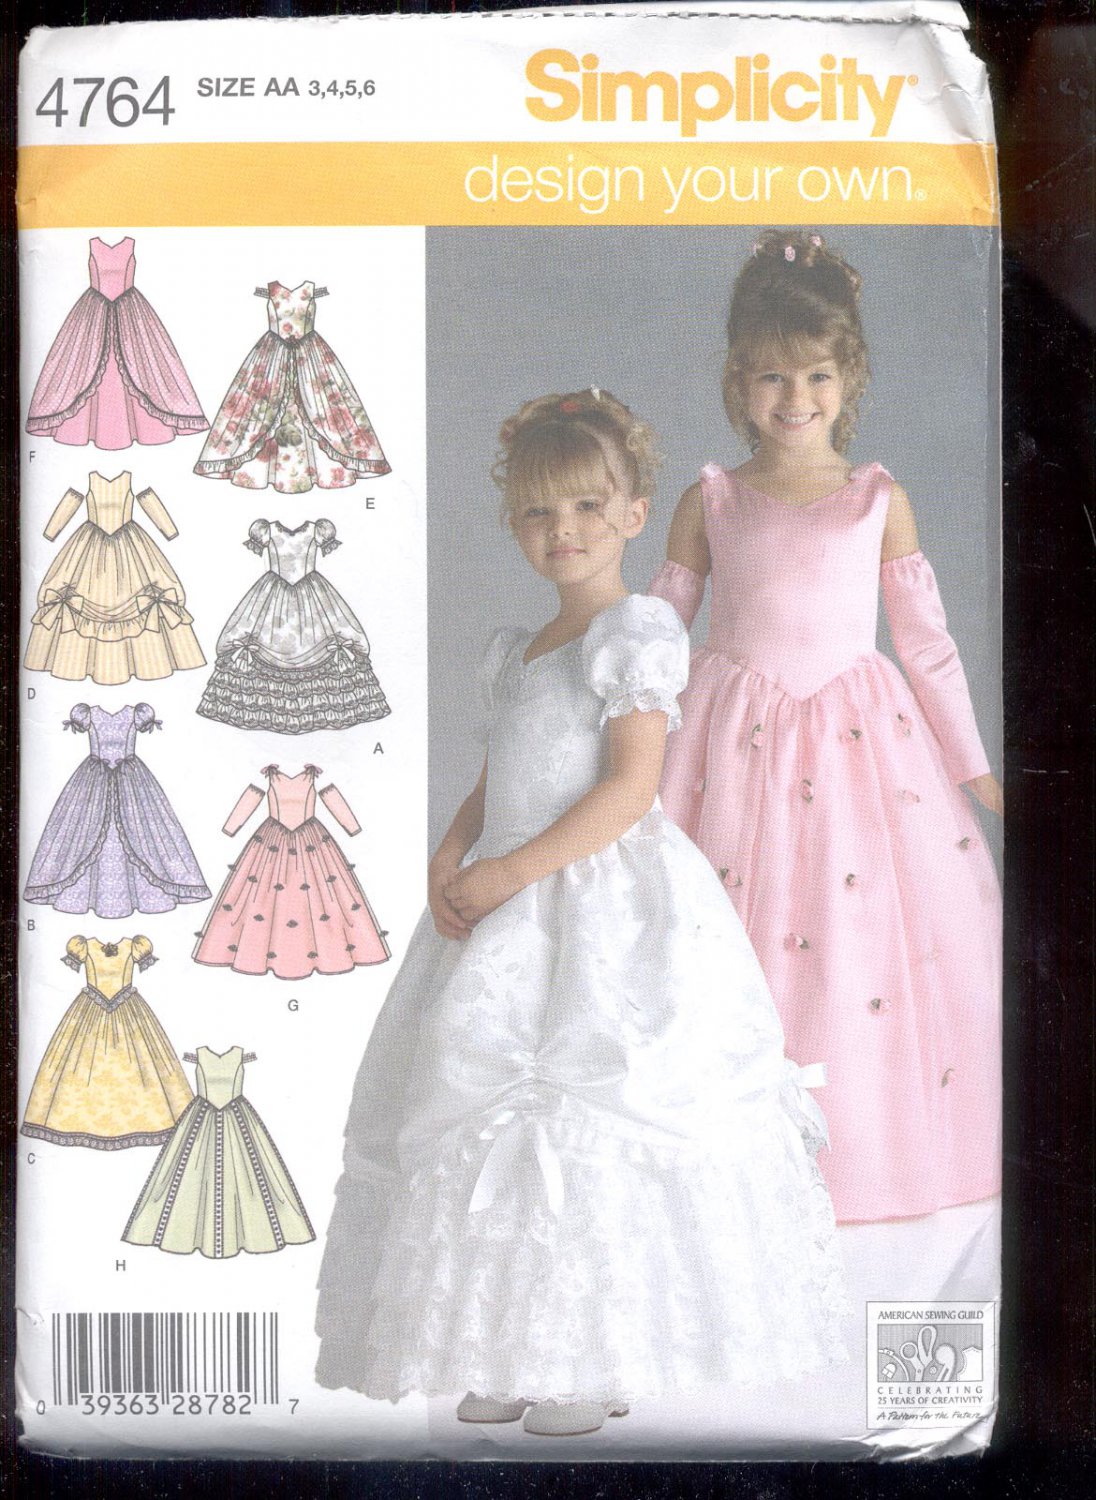 Simplicity Pattern 4764 Child's special occression dress sizes AA-...